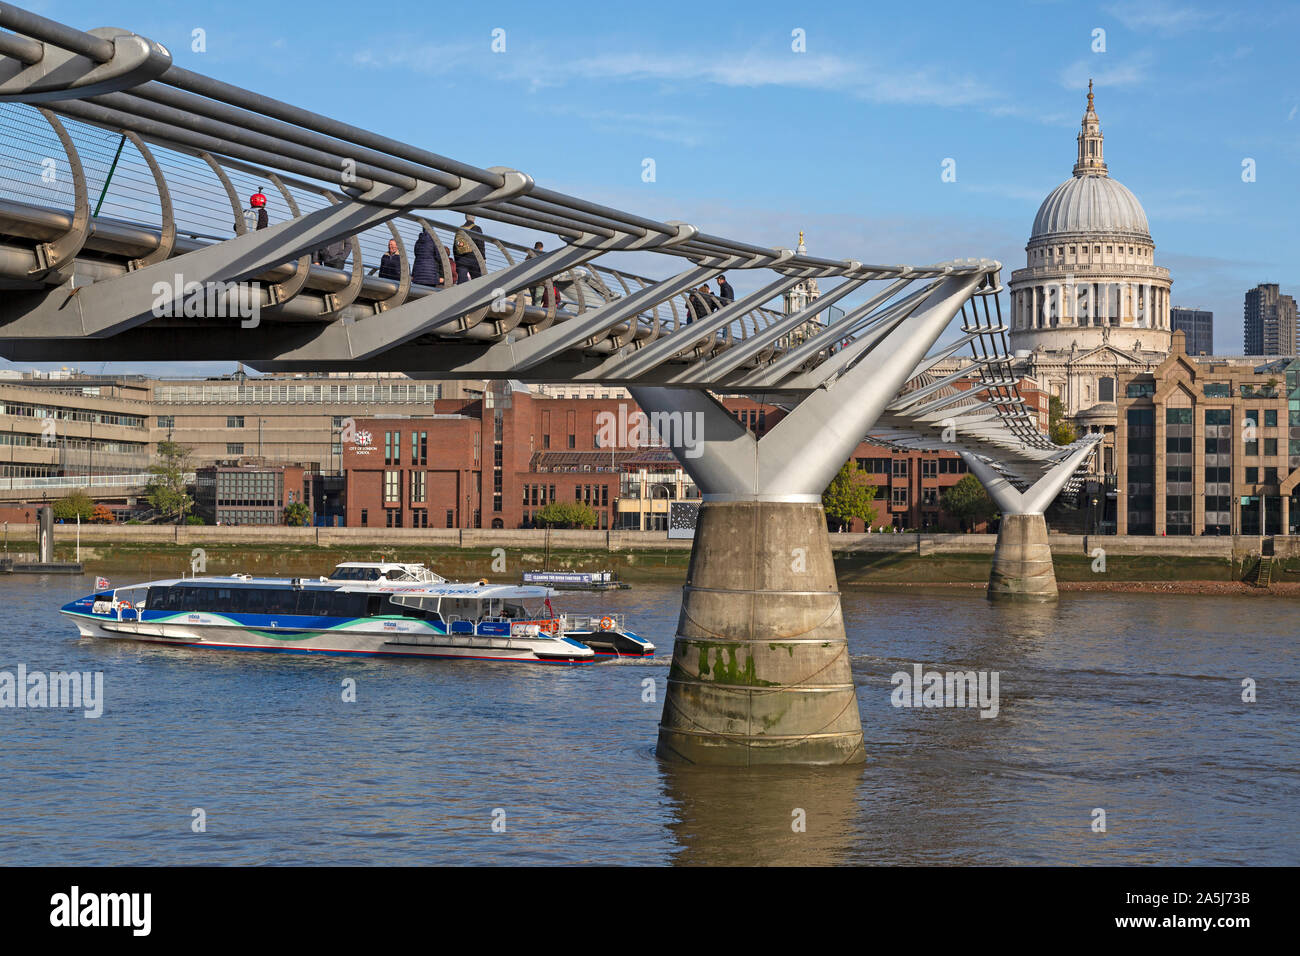 People walking over the Millennium Bridge across the River Thames in London, England, UK. The dome of St. Paul's Cathedral in the distance. Stock Photo